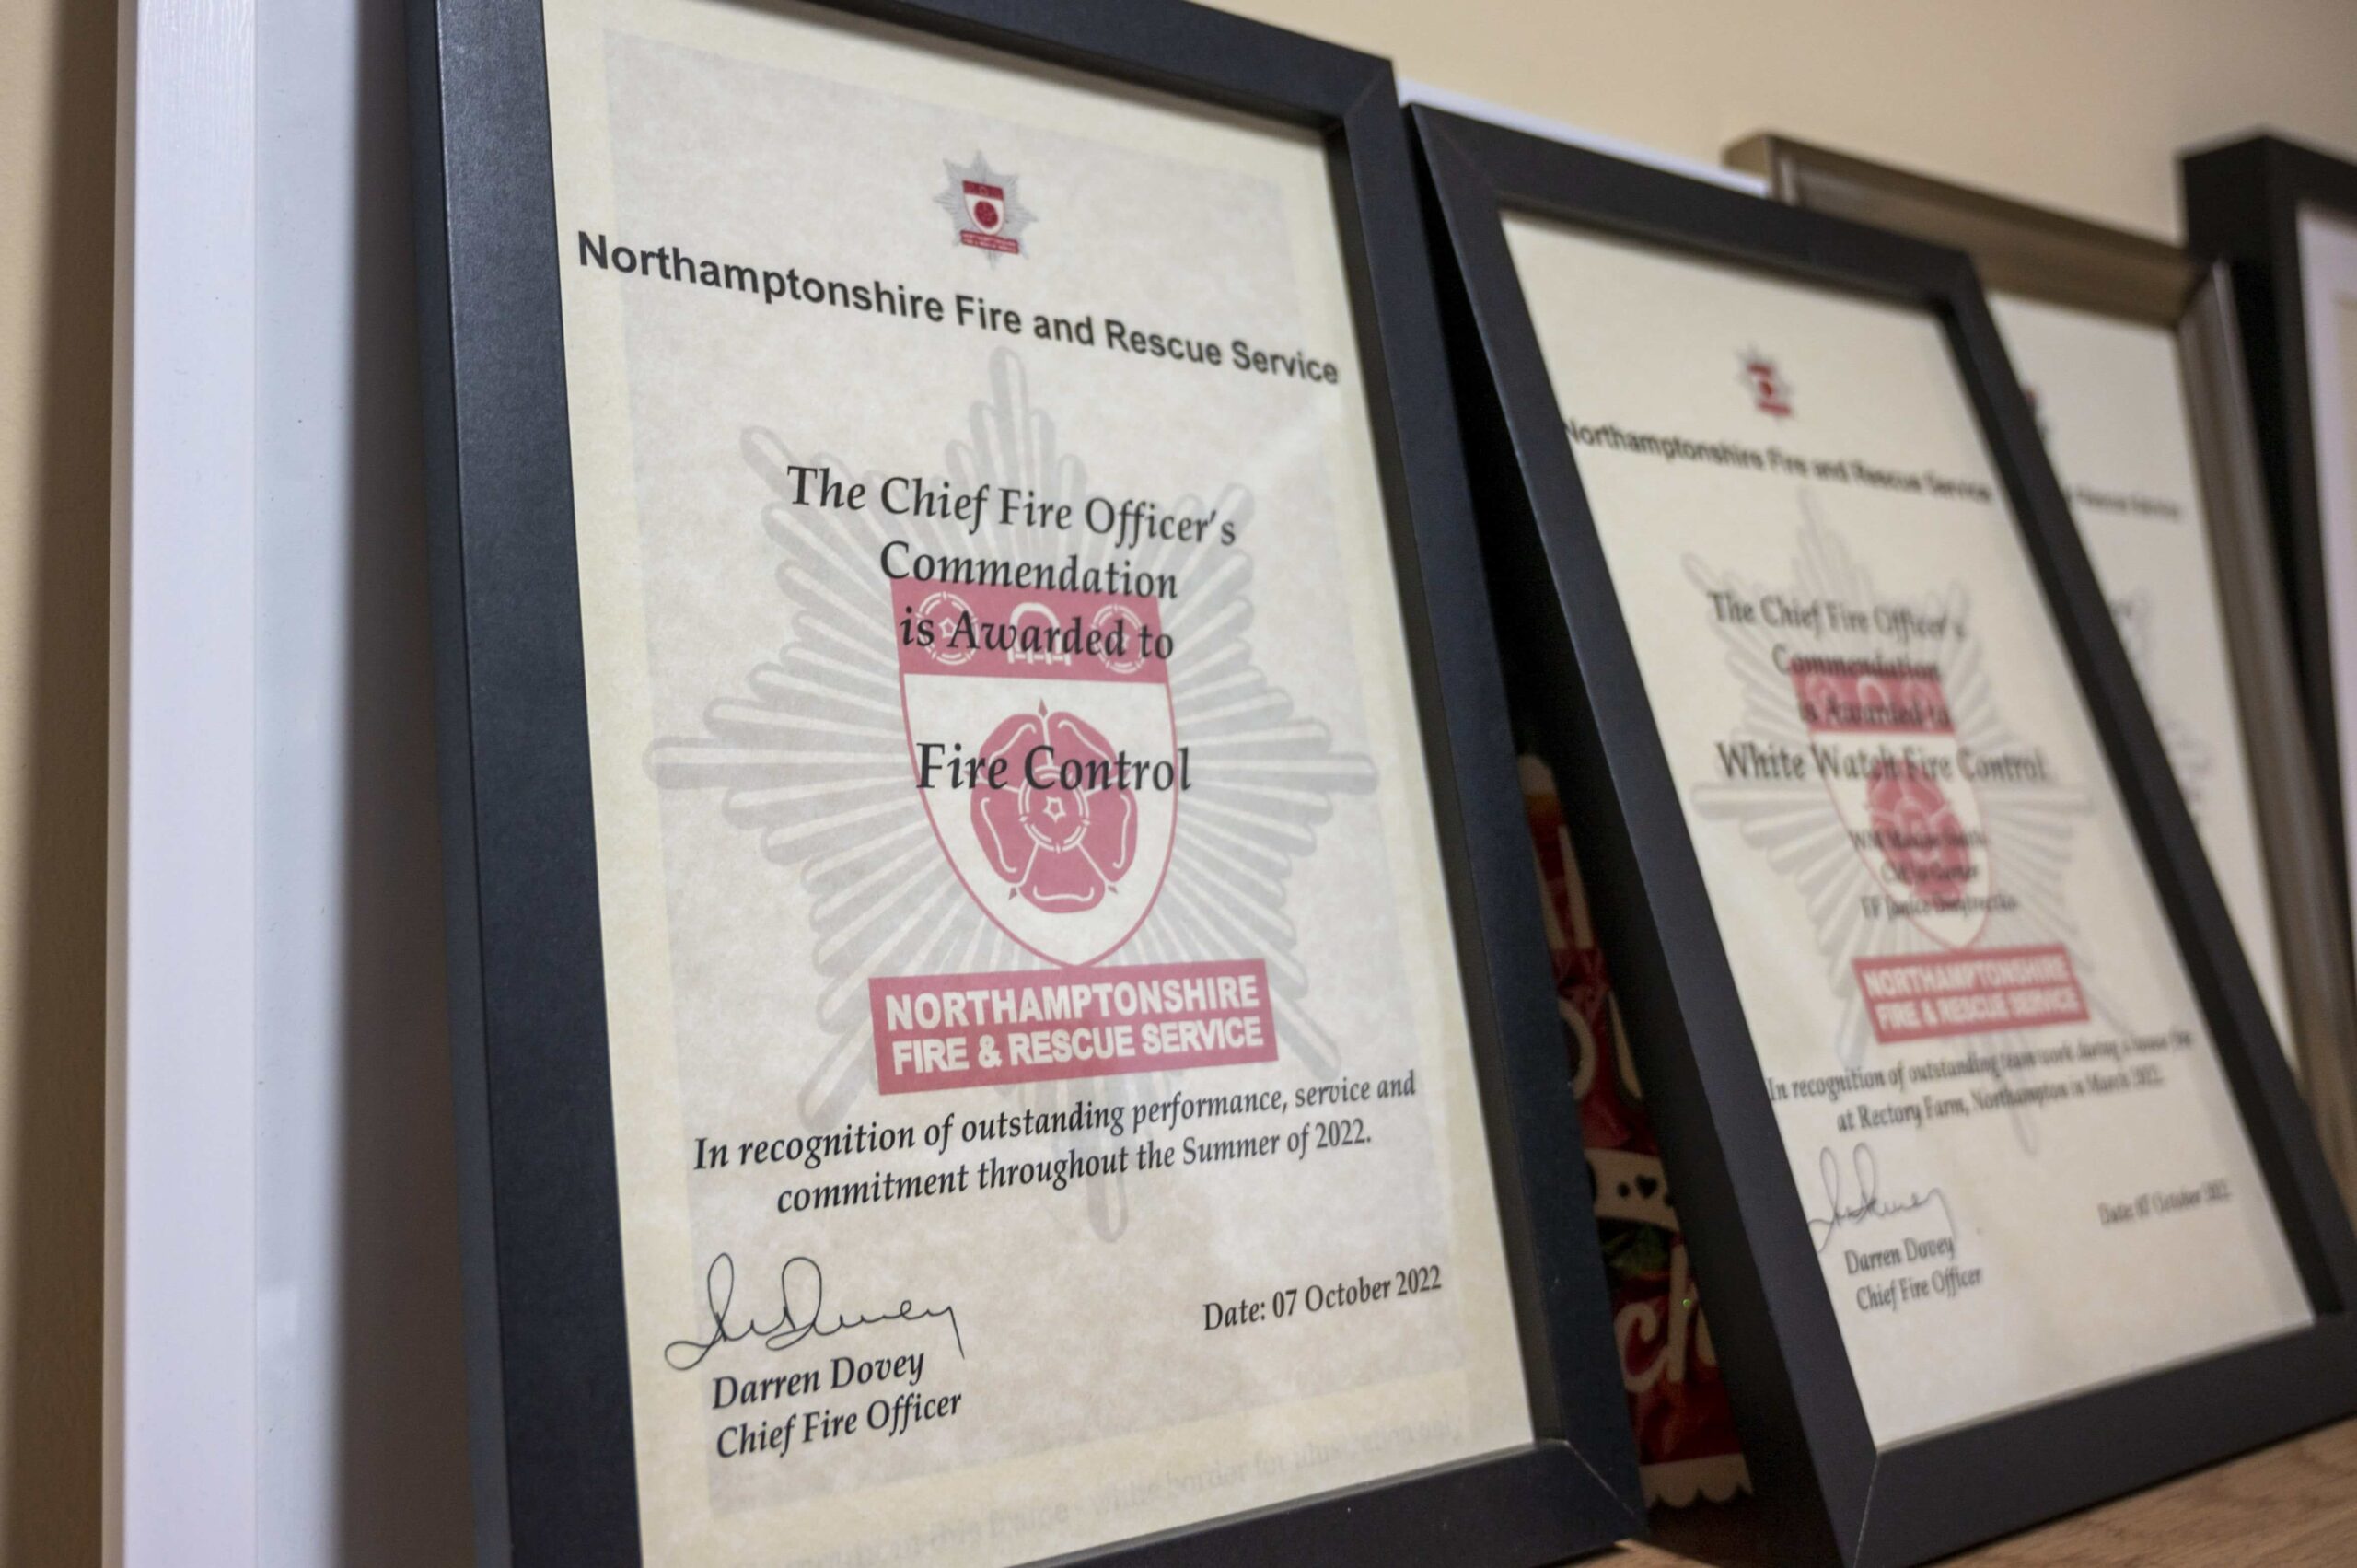 Close up of Chief Fire Officer award to Fire Control